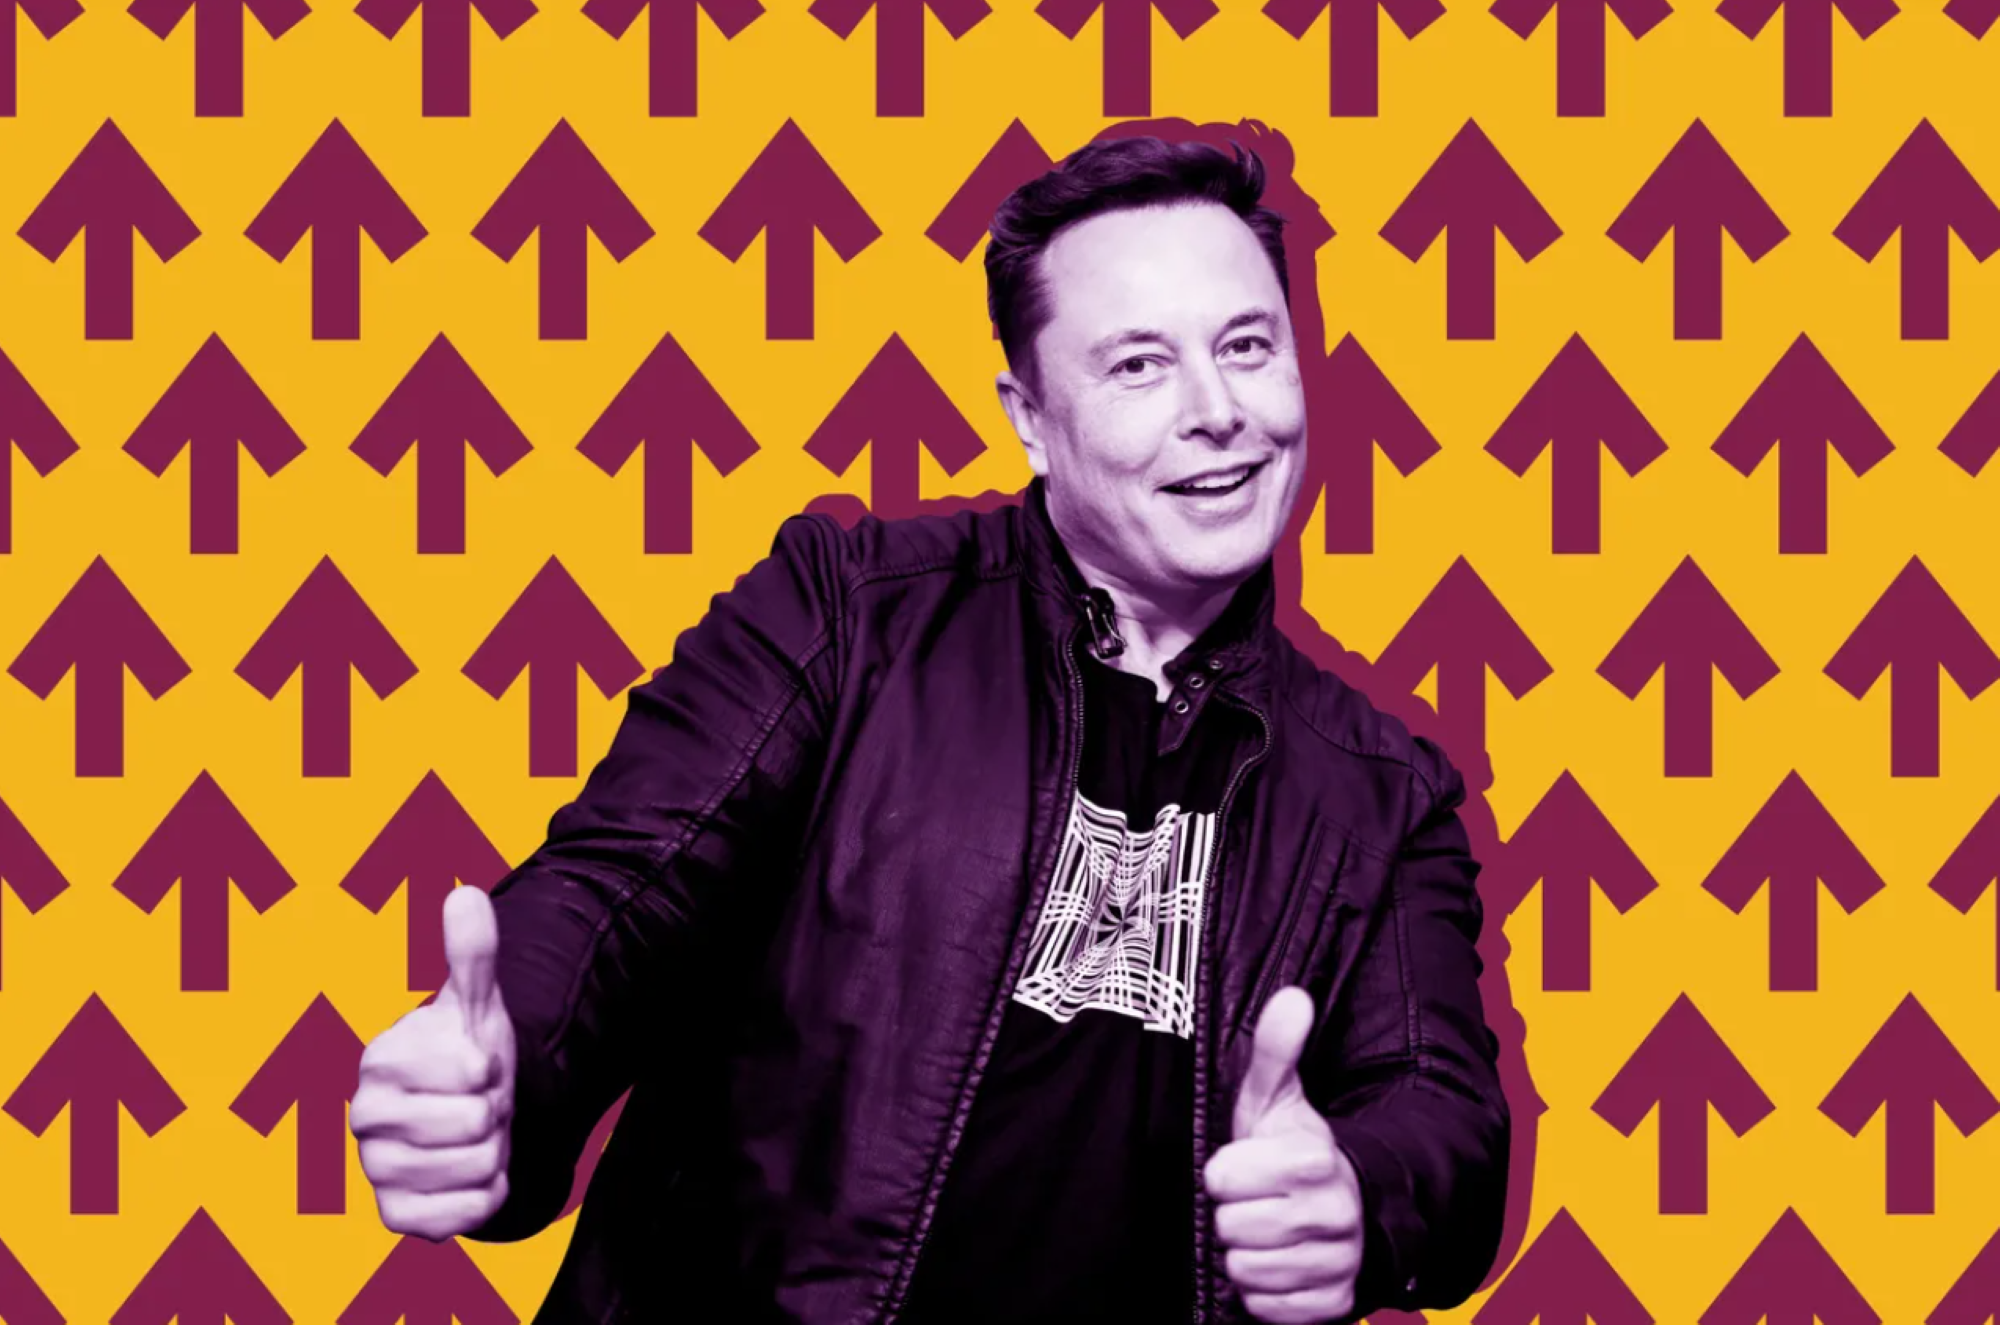 Elon Musk stands with both his thumbs up in front of a yellow background with purple arrows pointing up